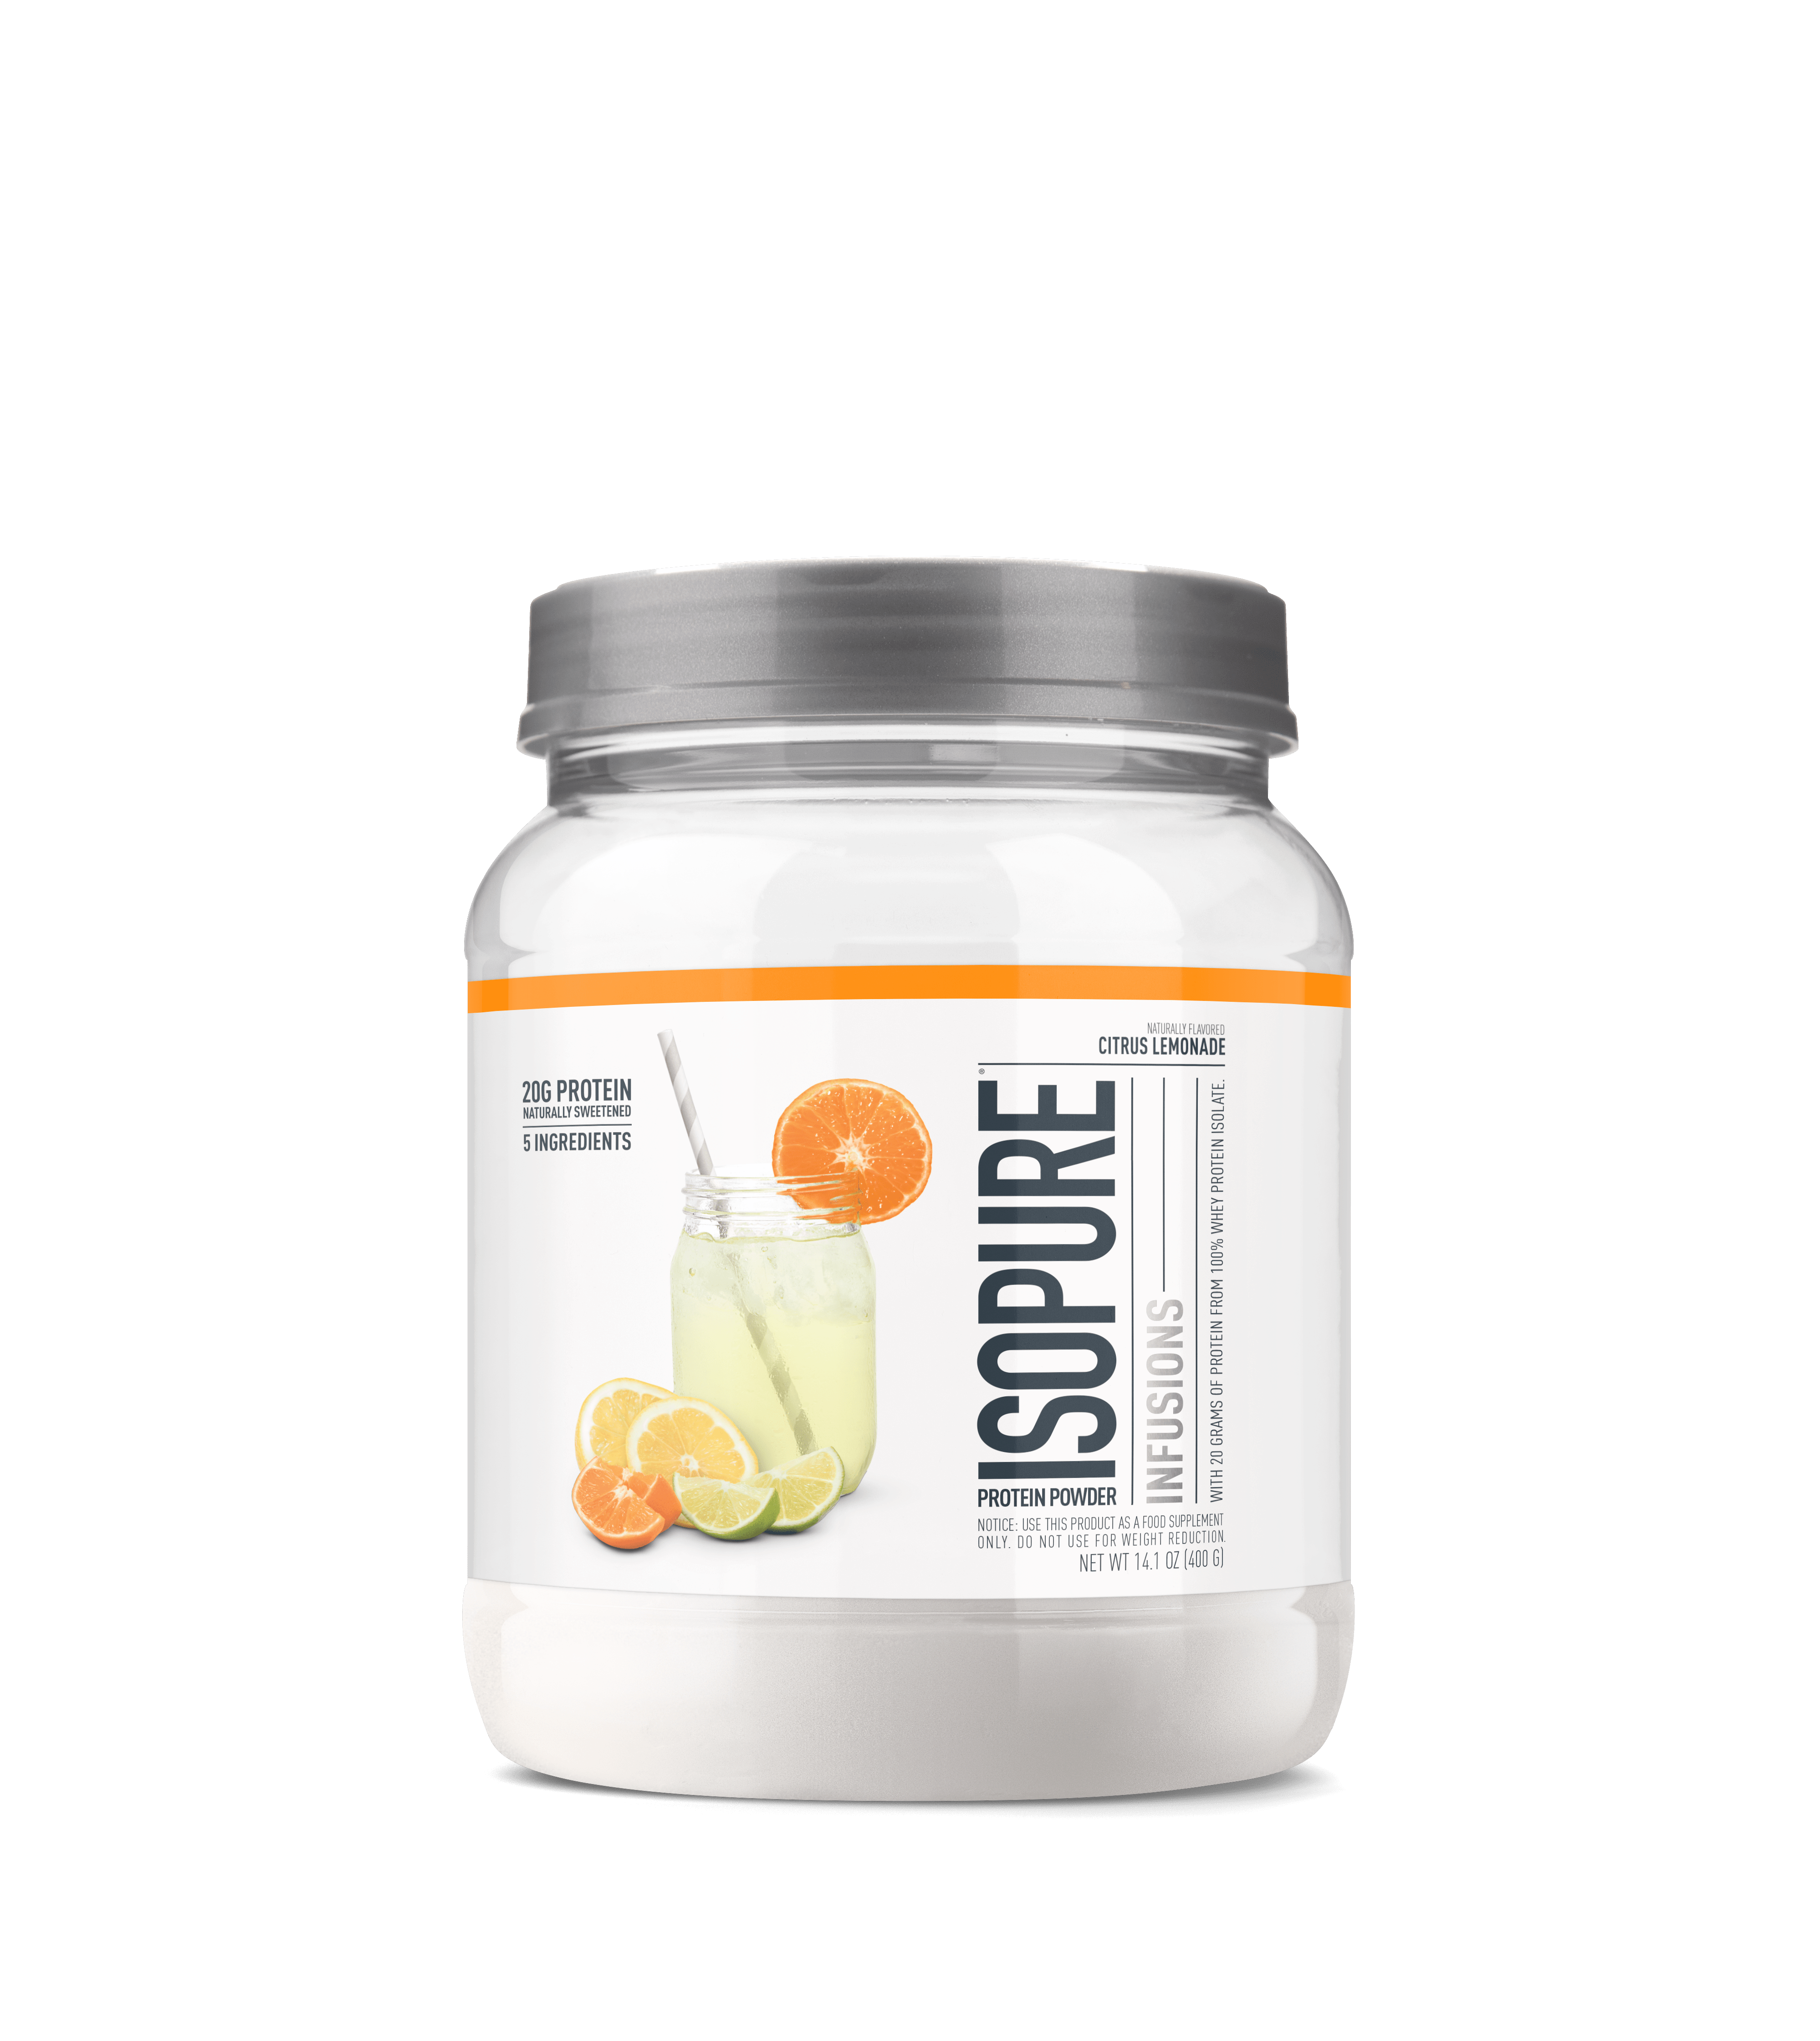 Isopure Infusions (400g) Natures Best-Tropical Punch